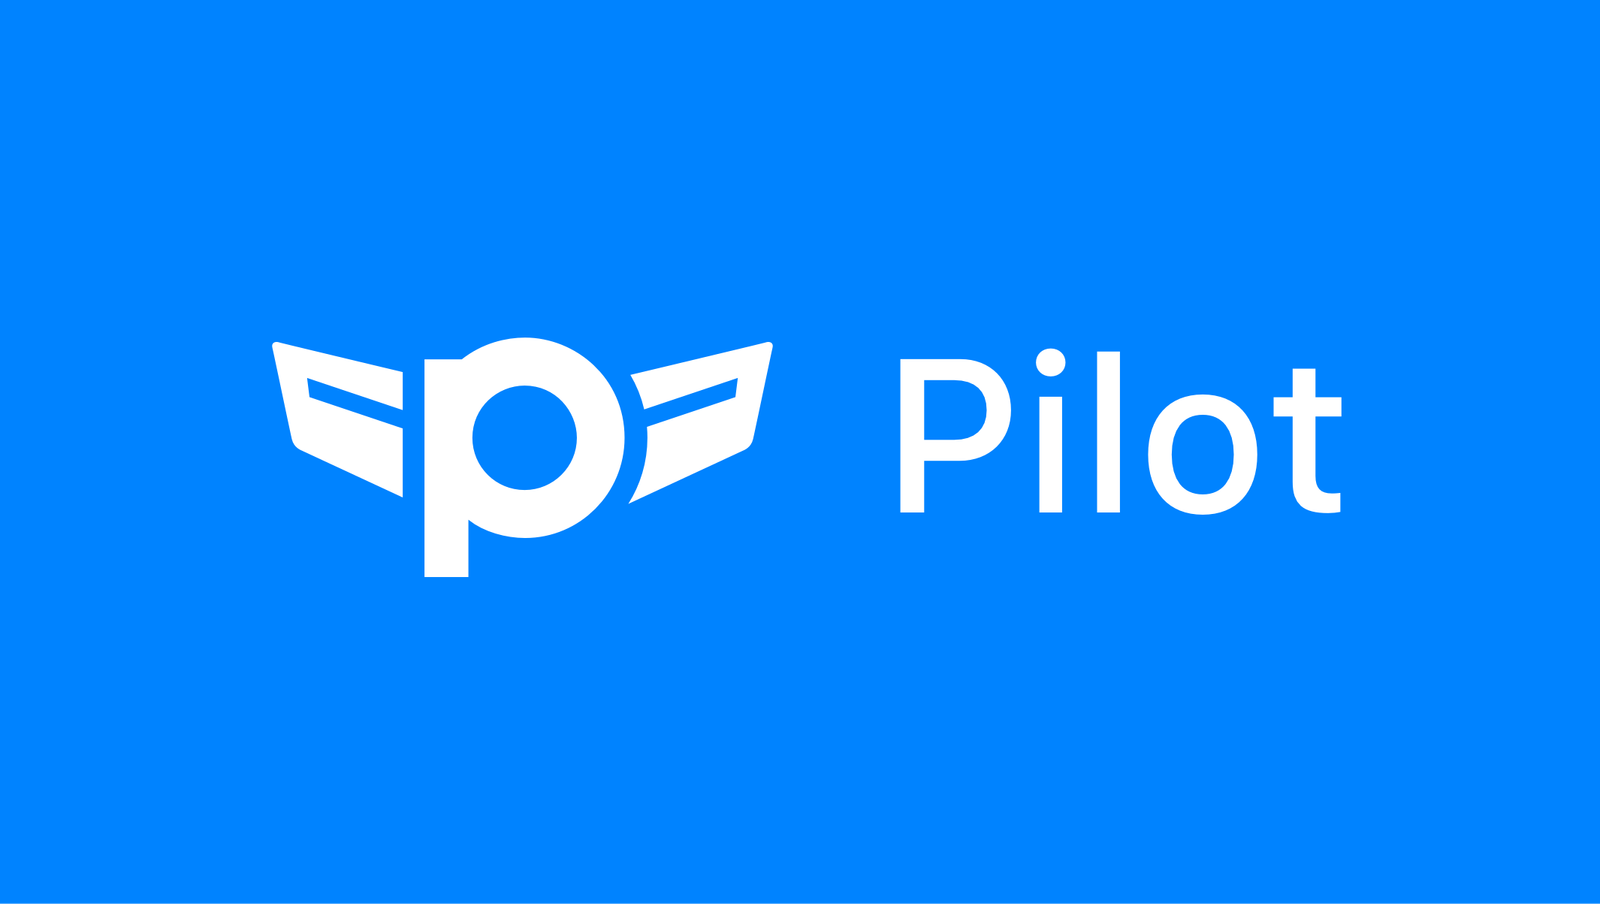 Pilot - reviews, price, alternatives (analogues, comparisons, cost of services)